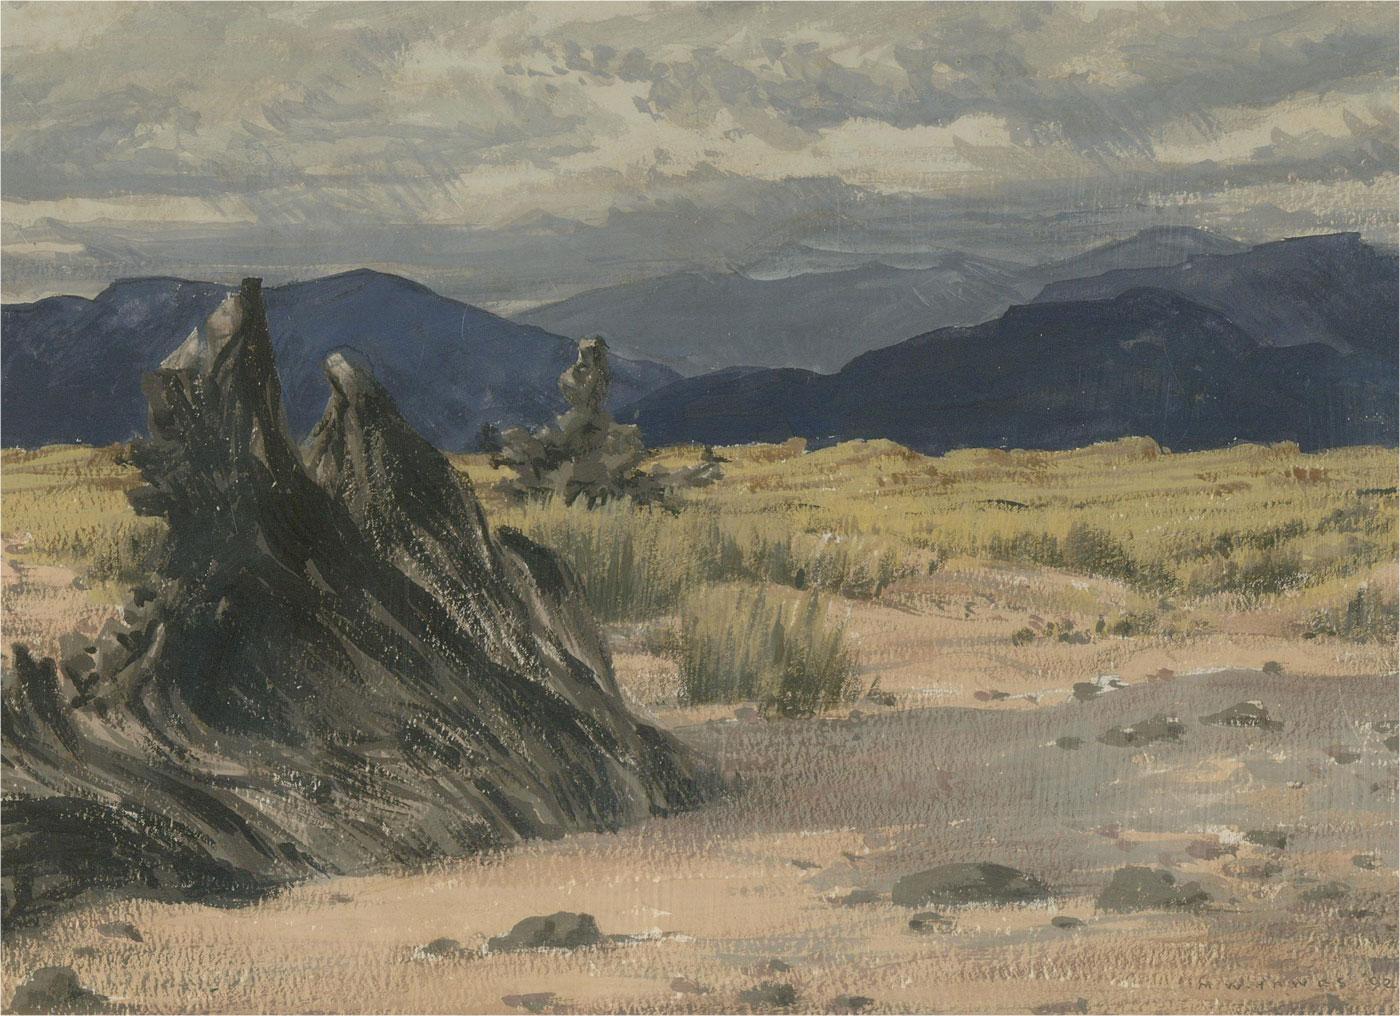 A captivating gouache painting by the British artist Meredith William Hawes, depicting a landscape scene with driftwood and mountains in the distance. Signed and dated to the lower right-hand corner. There is an exhibition label on the reverse